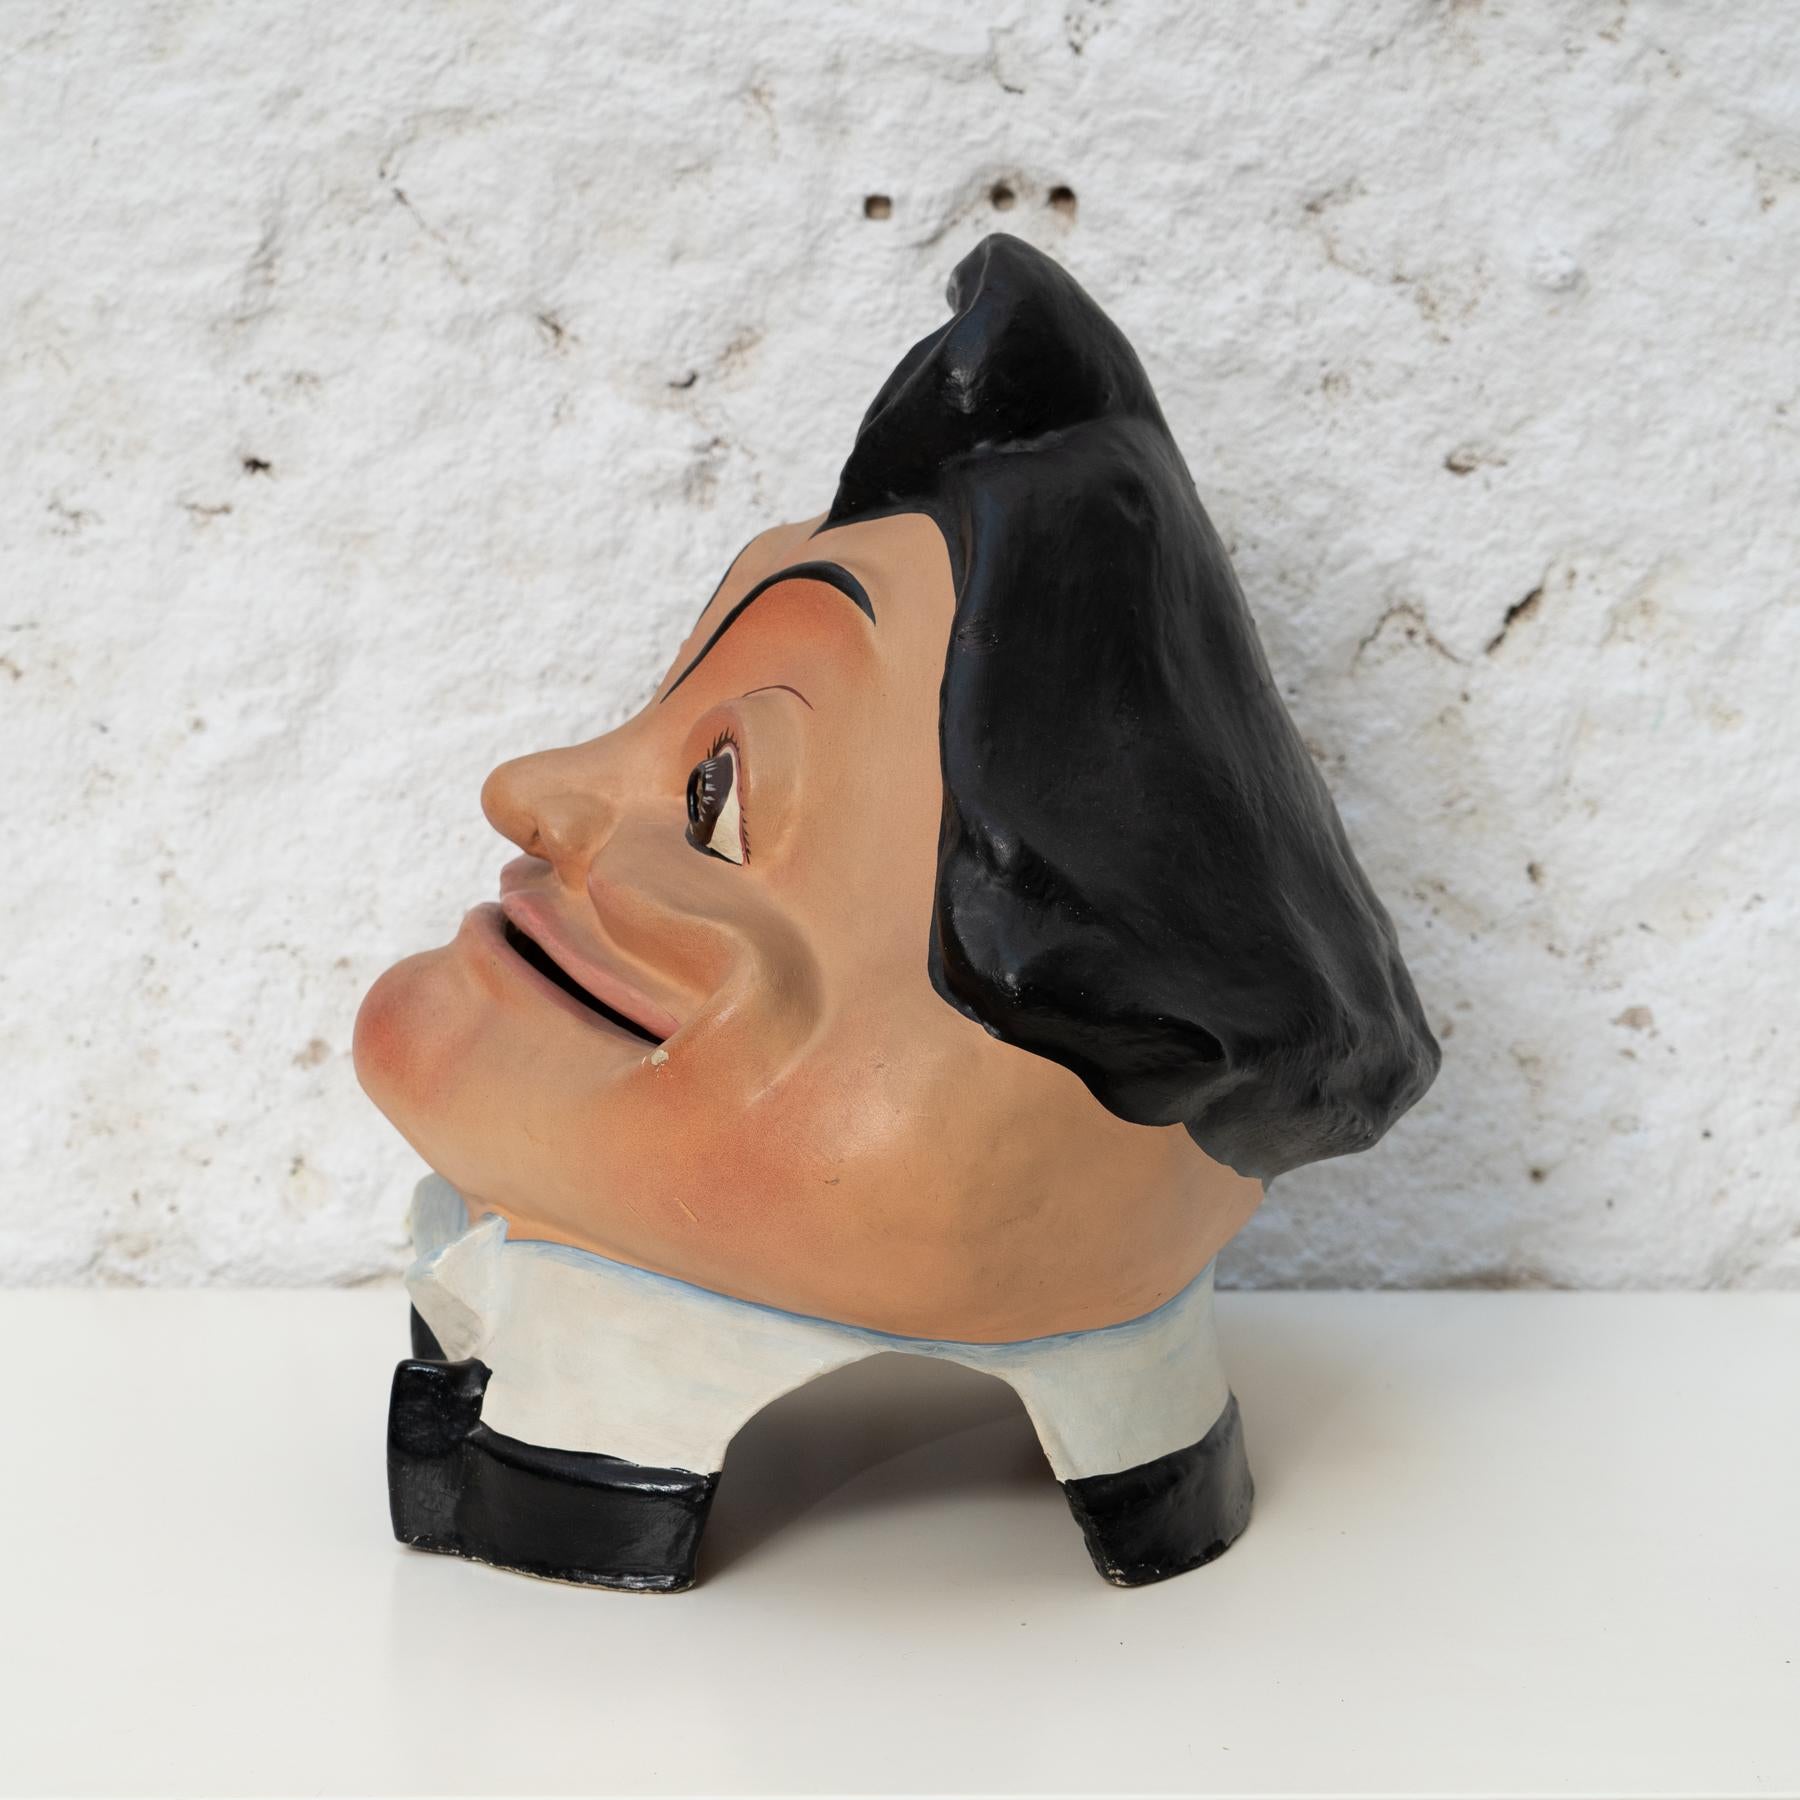 Late 20th Century Whimsical Tradition: 'Cap Gros' Papier-Mâché Netól Character, c. 1970 For Sale